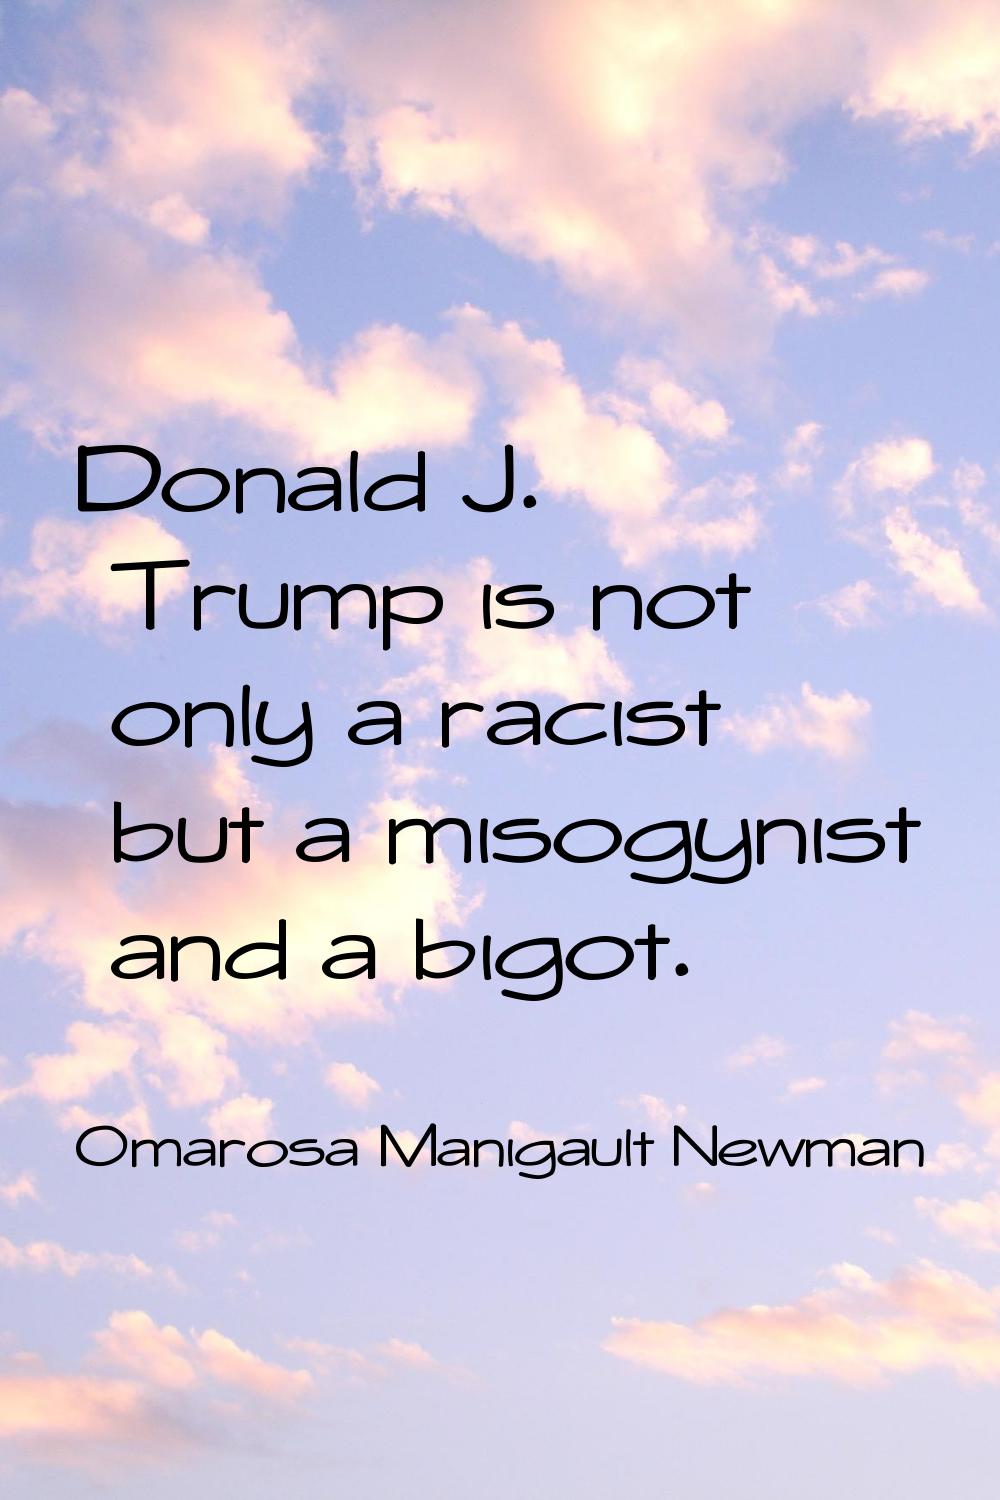 Donald J. Trump is not only a racist but a misogynist and a bigot.